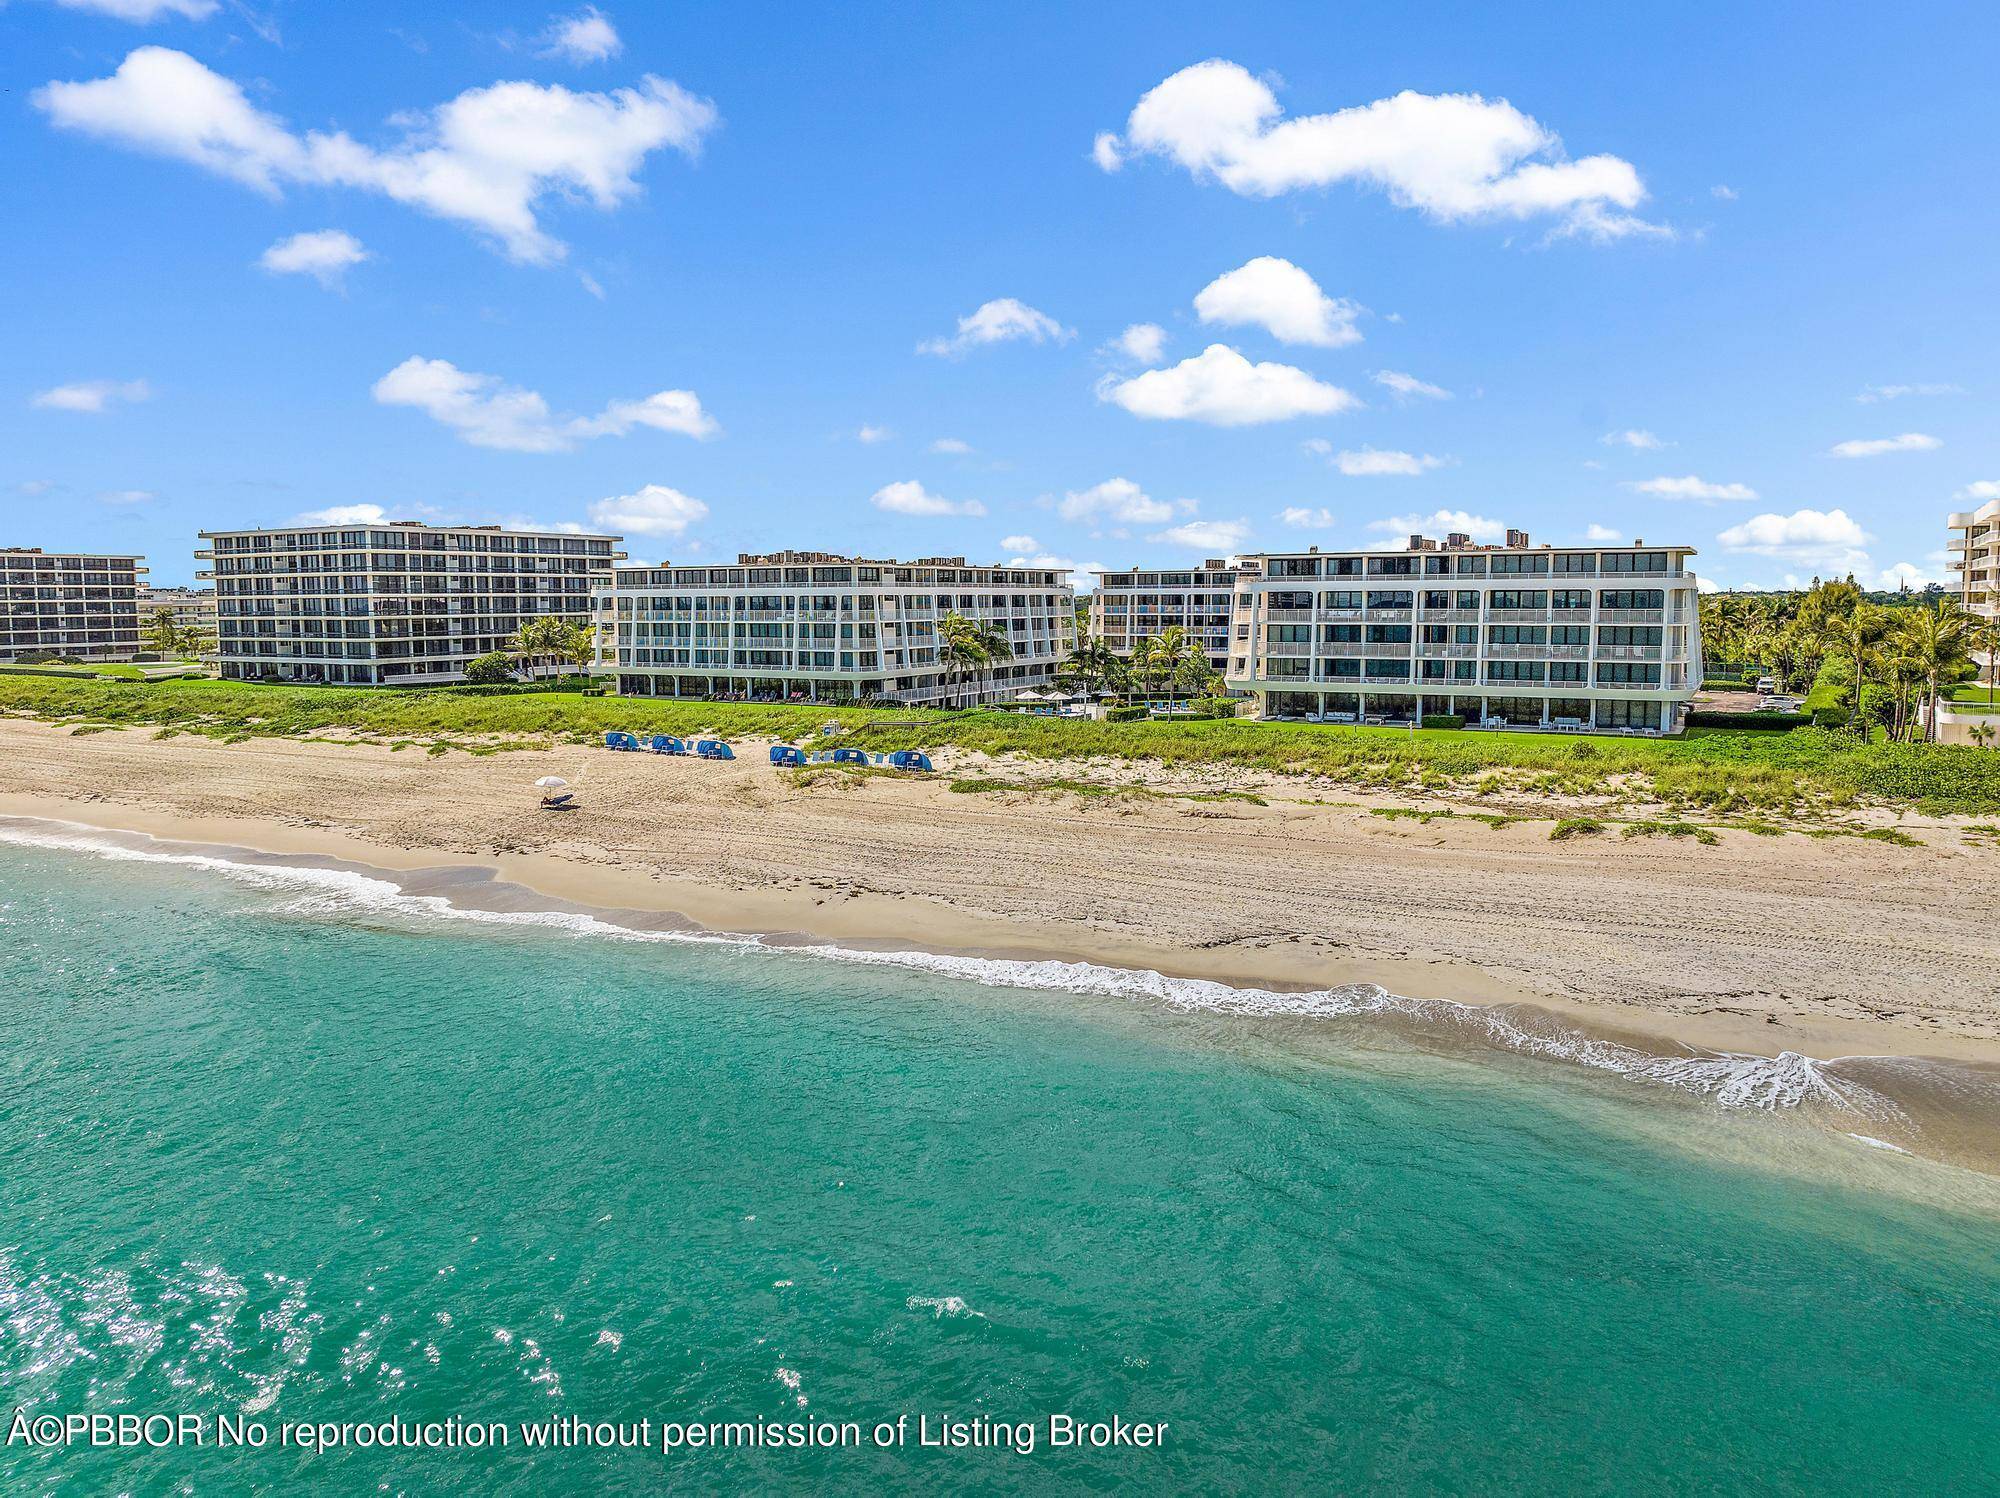 Welcome to this stunning beachfront condo at 2600 South Ocean.